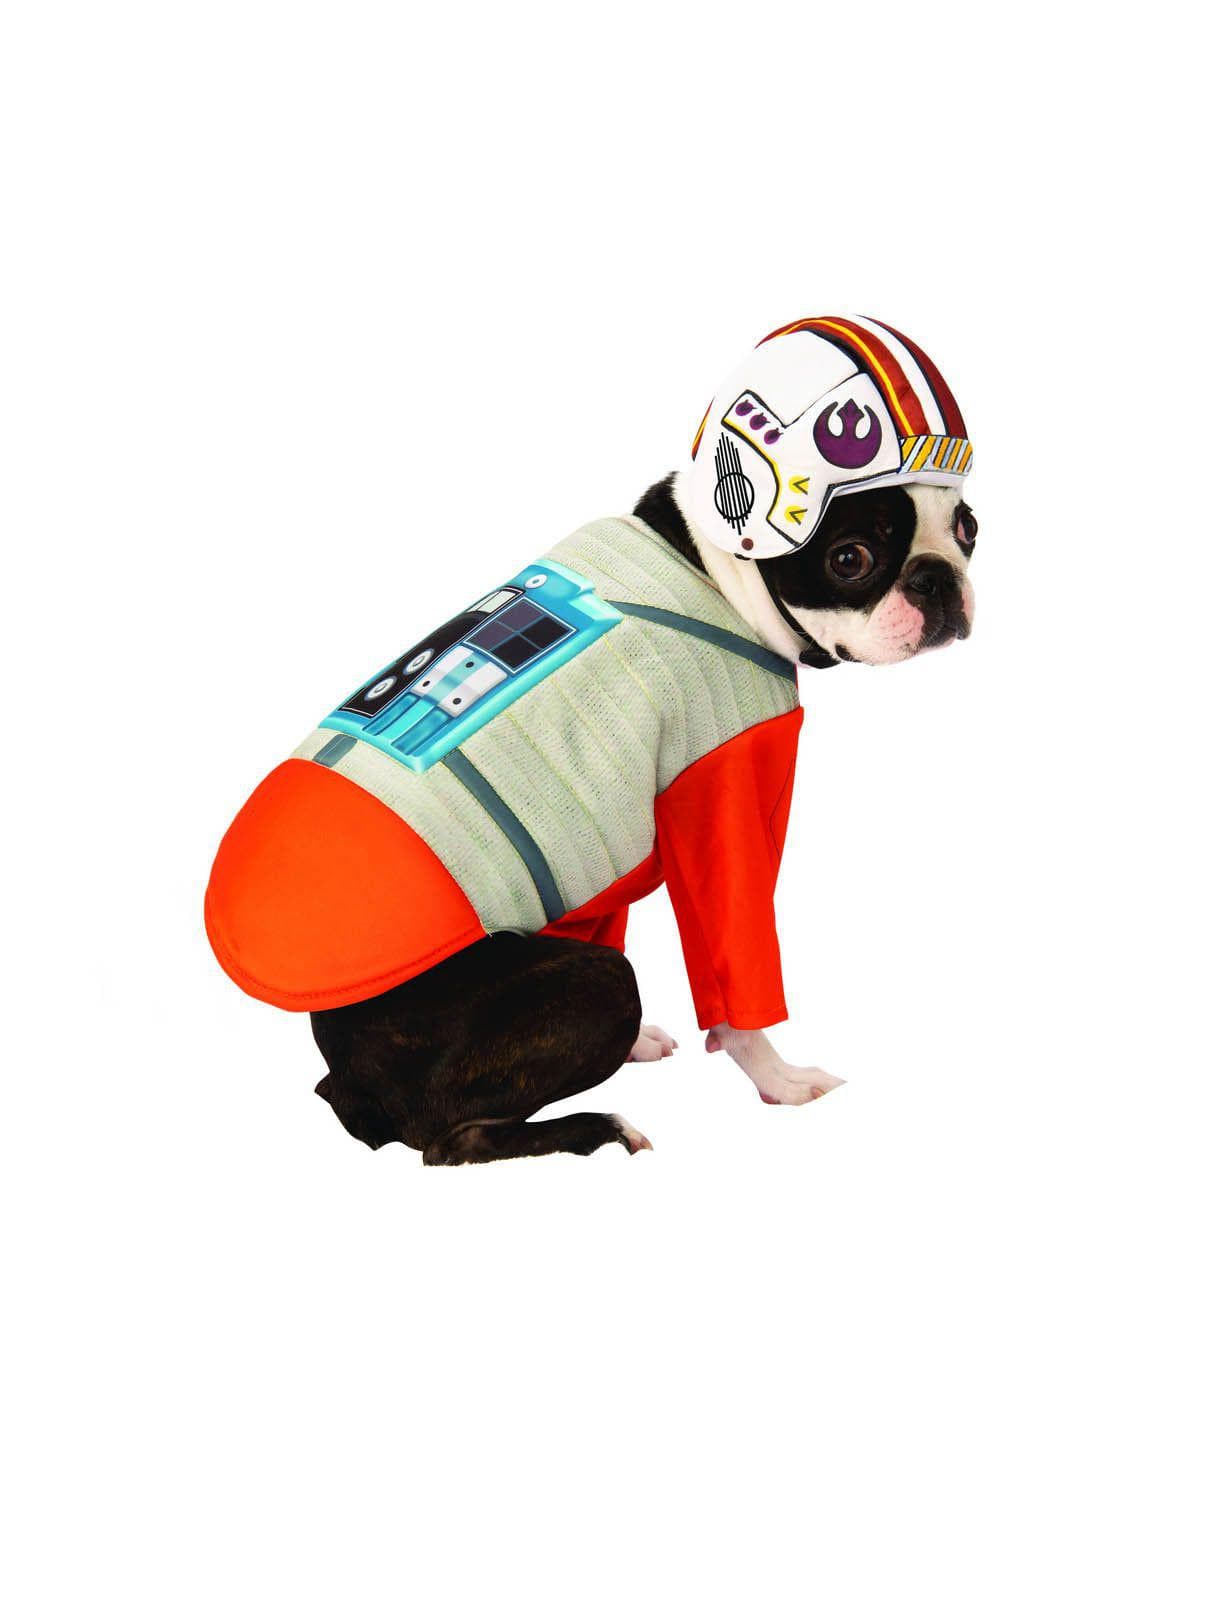 Star Wars X-Wing Fighter Pet Costume - costumes.com